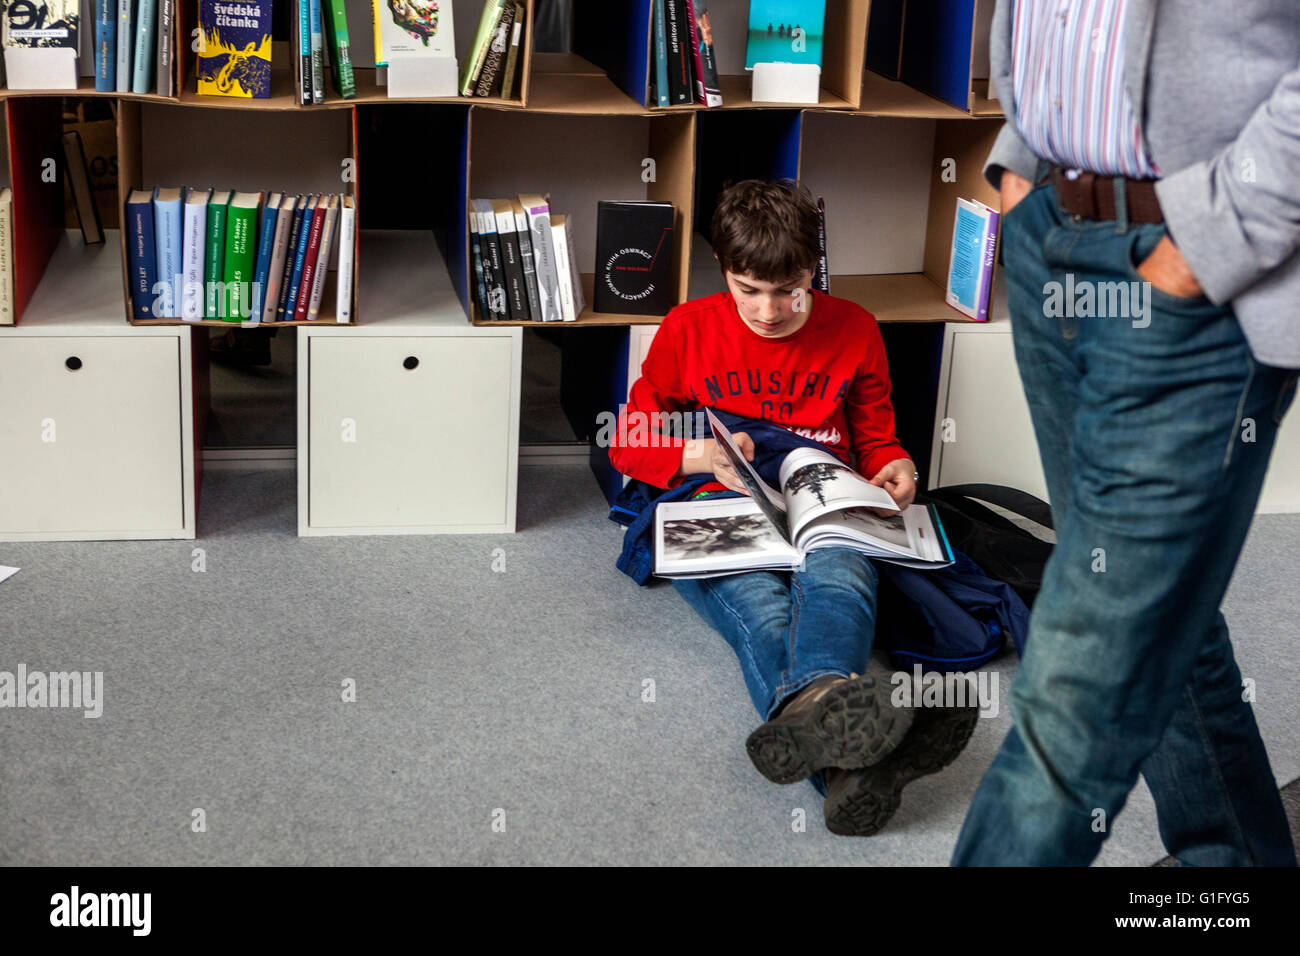 A young reader browsing the book, teenager book shop, teenager reading book, young teenager, Study, book young teenager Stock Photo